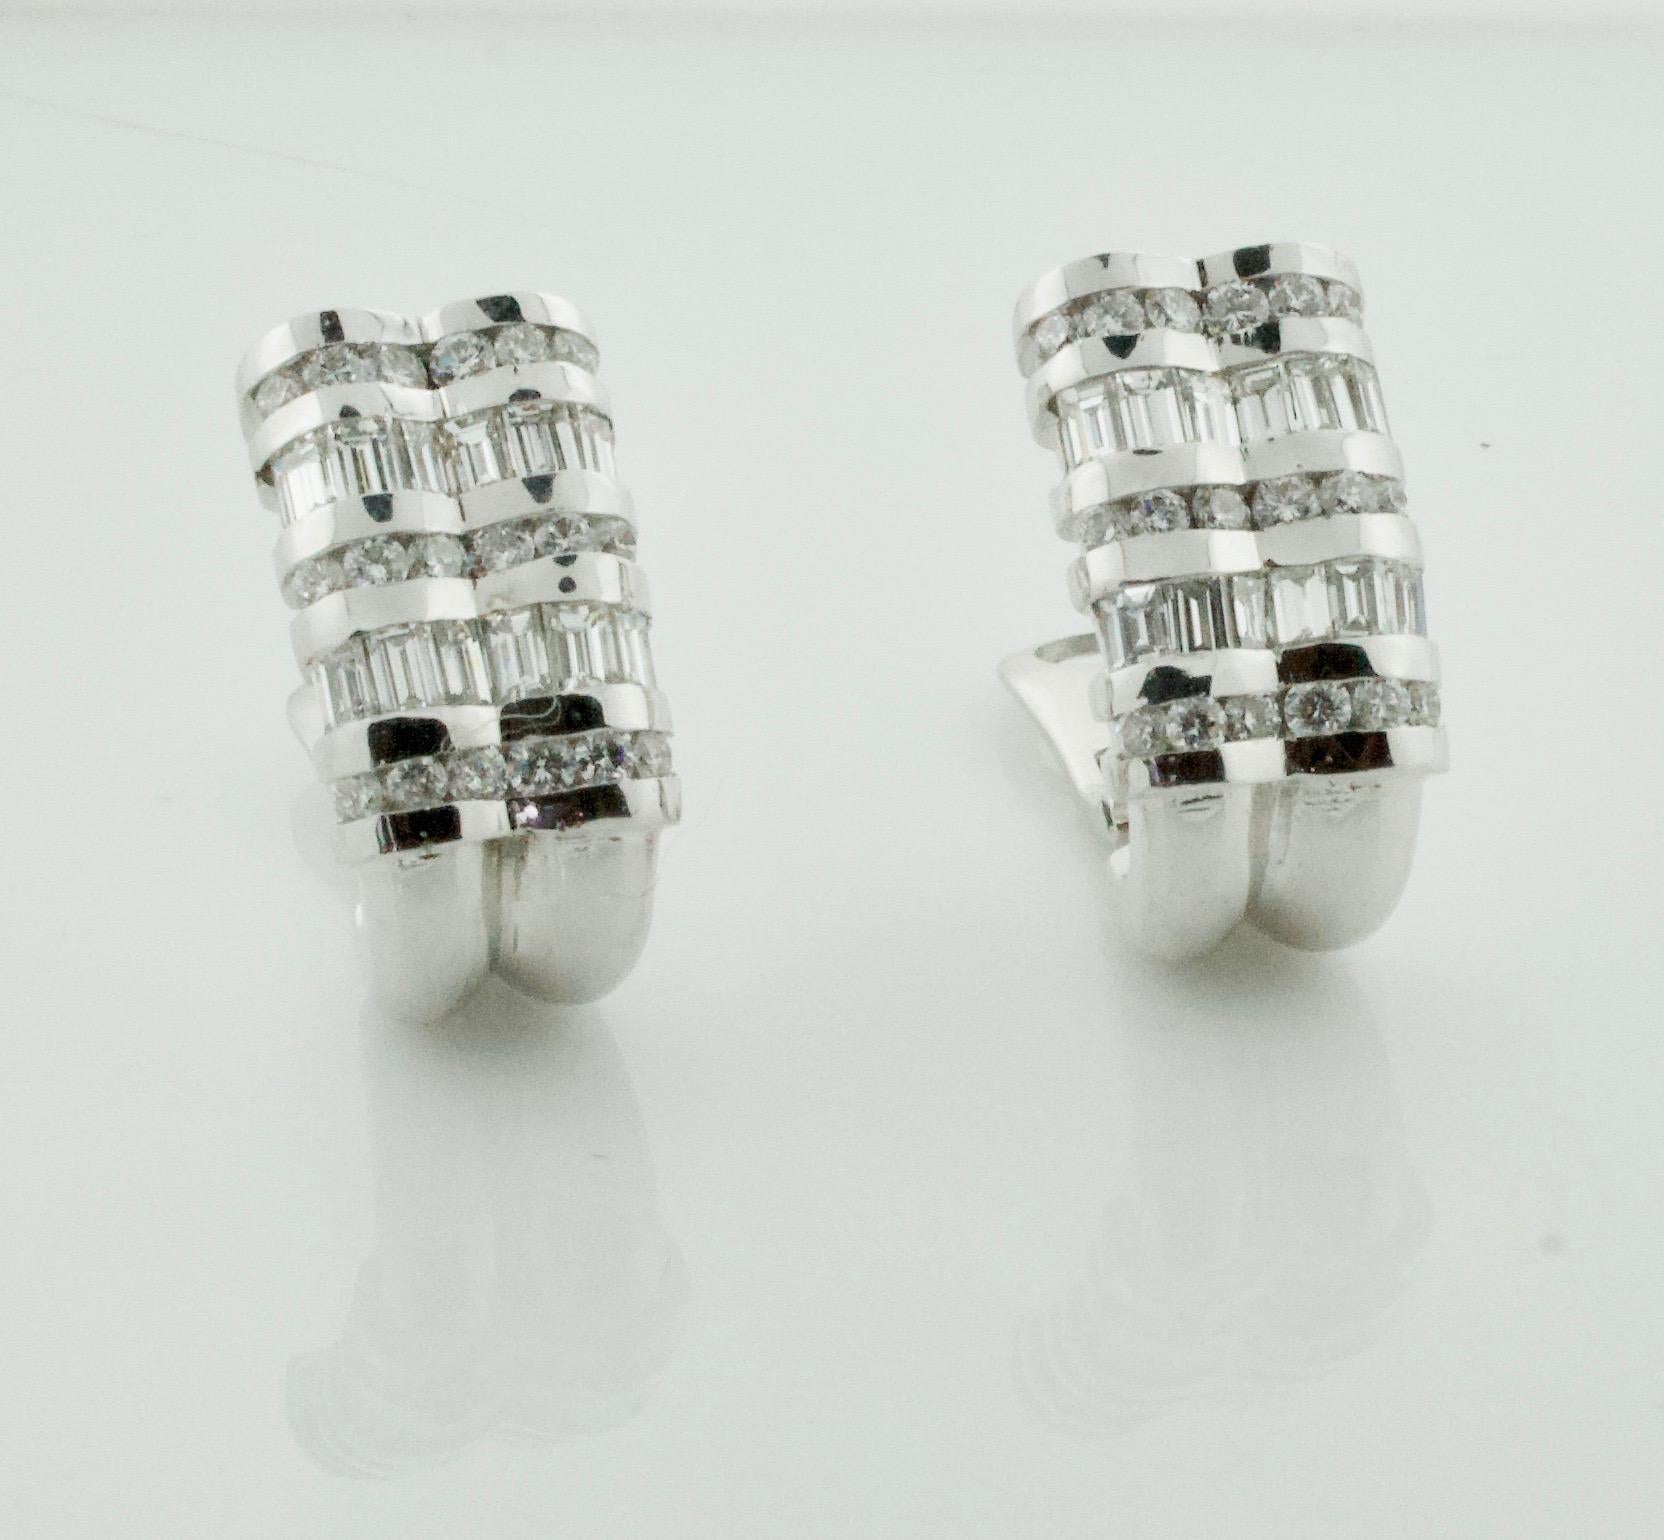 Chanel Set Diamond  Earrings in 18k White Gold 3.45 Carats Total Weight In Excellent Condition For Sale In Wailea, HI